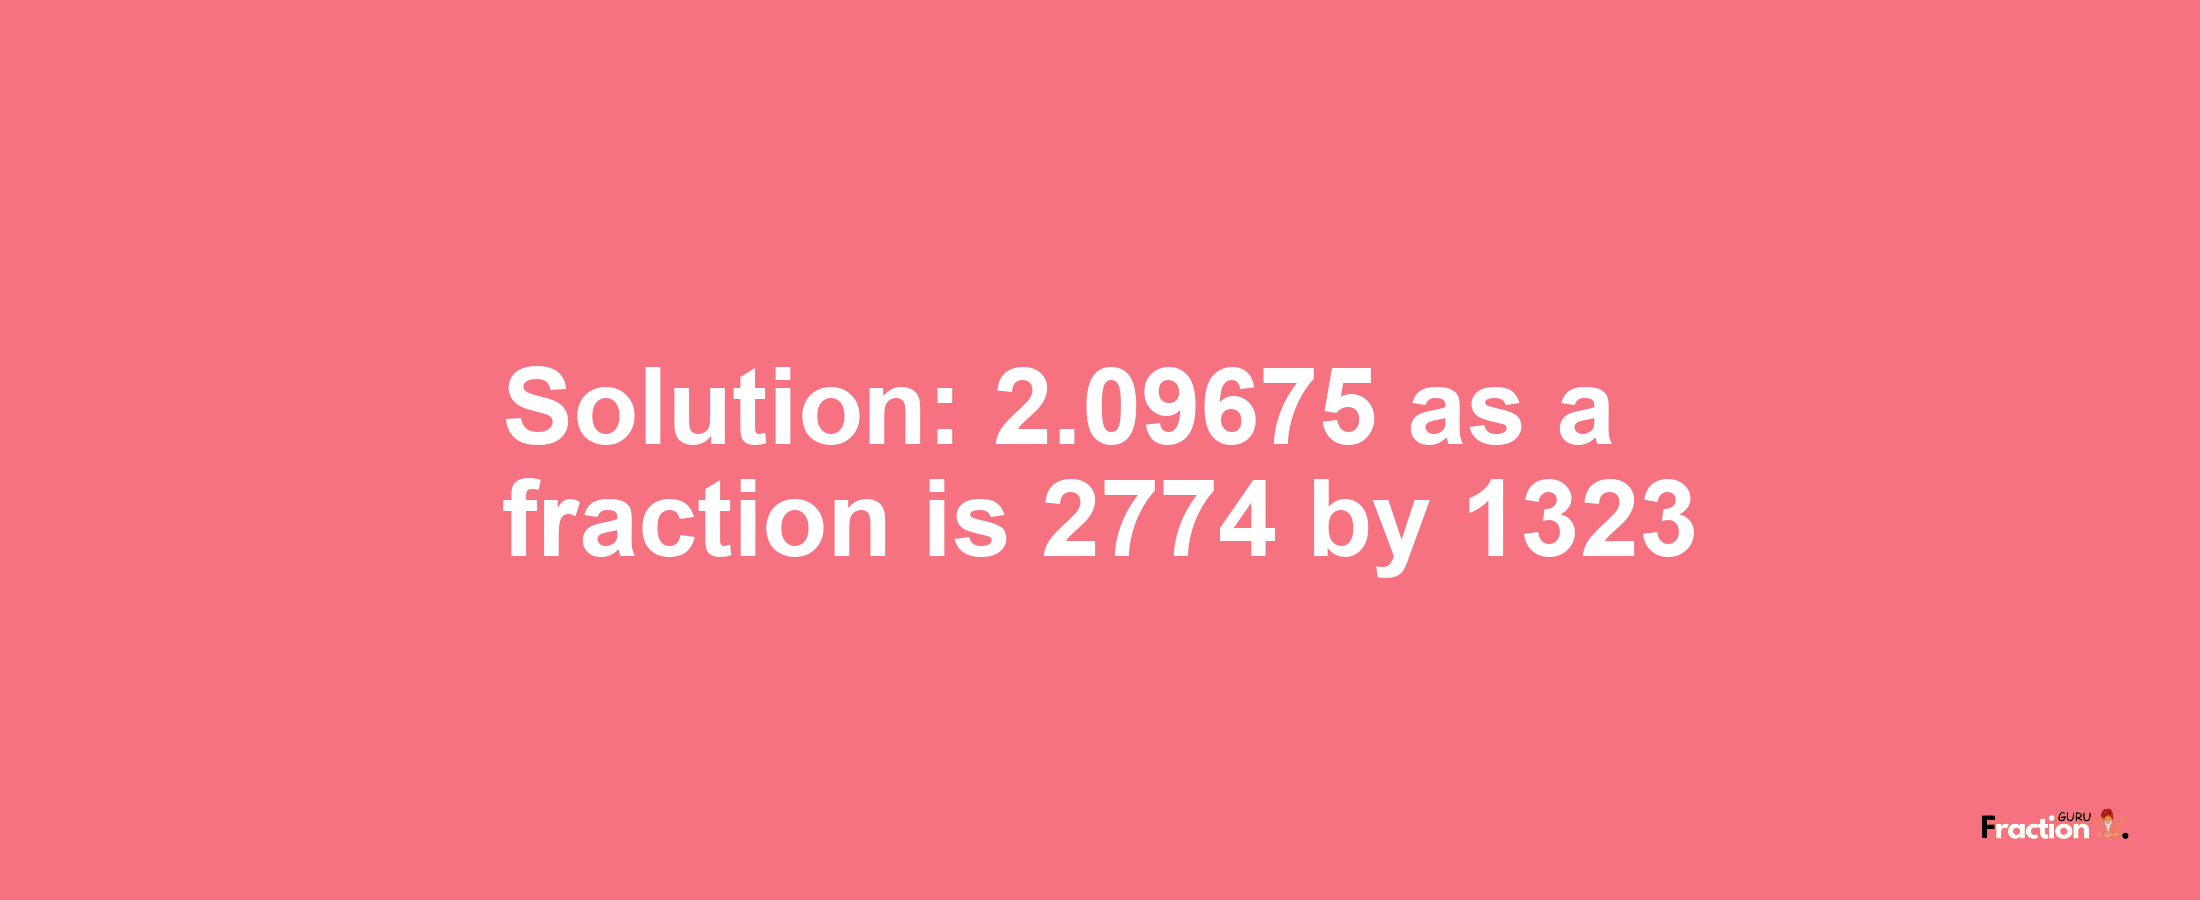 Solution:2.09675 as a fraction is 2774/1323